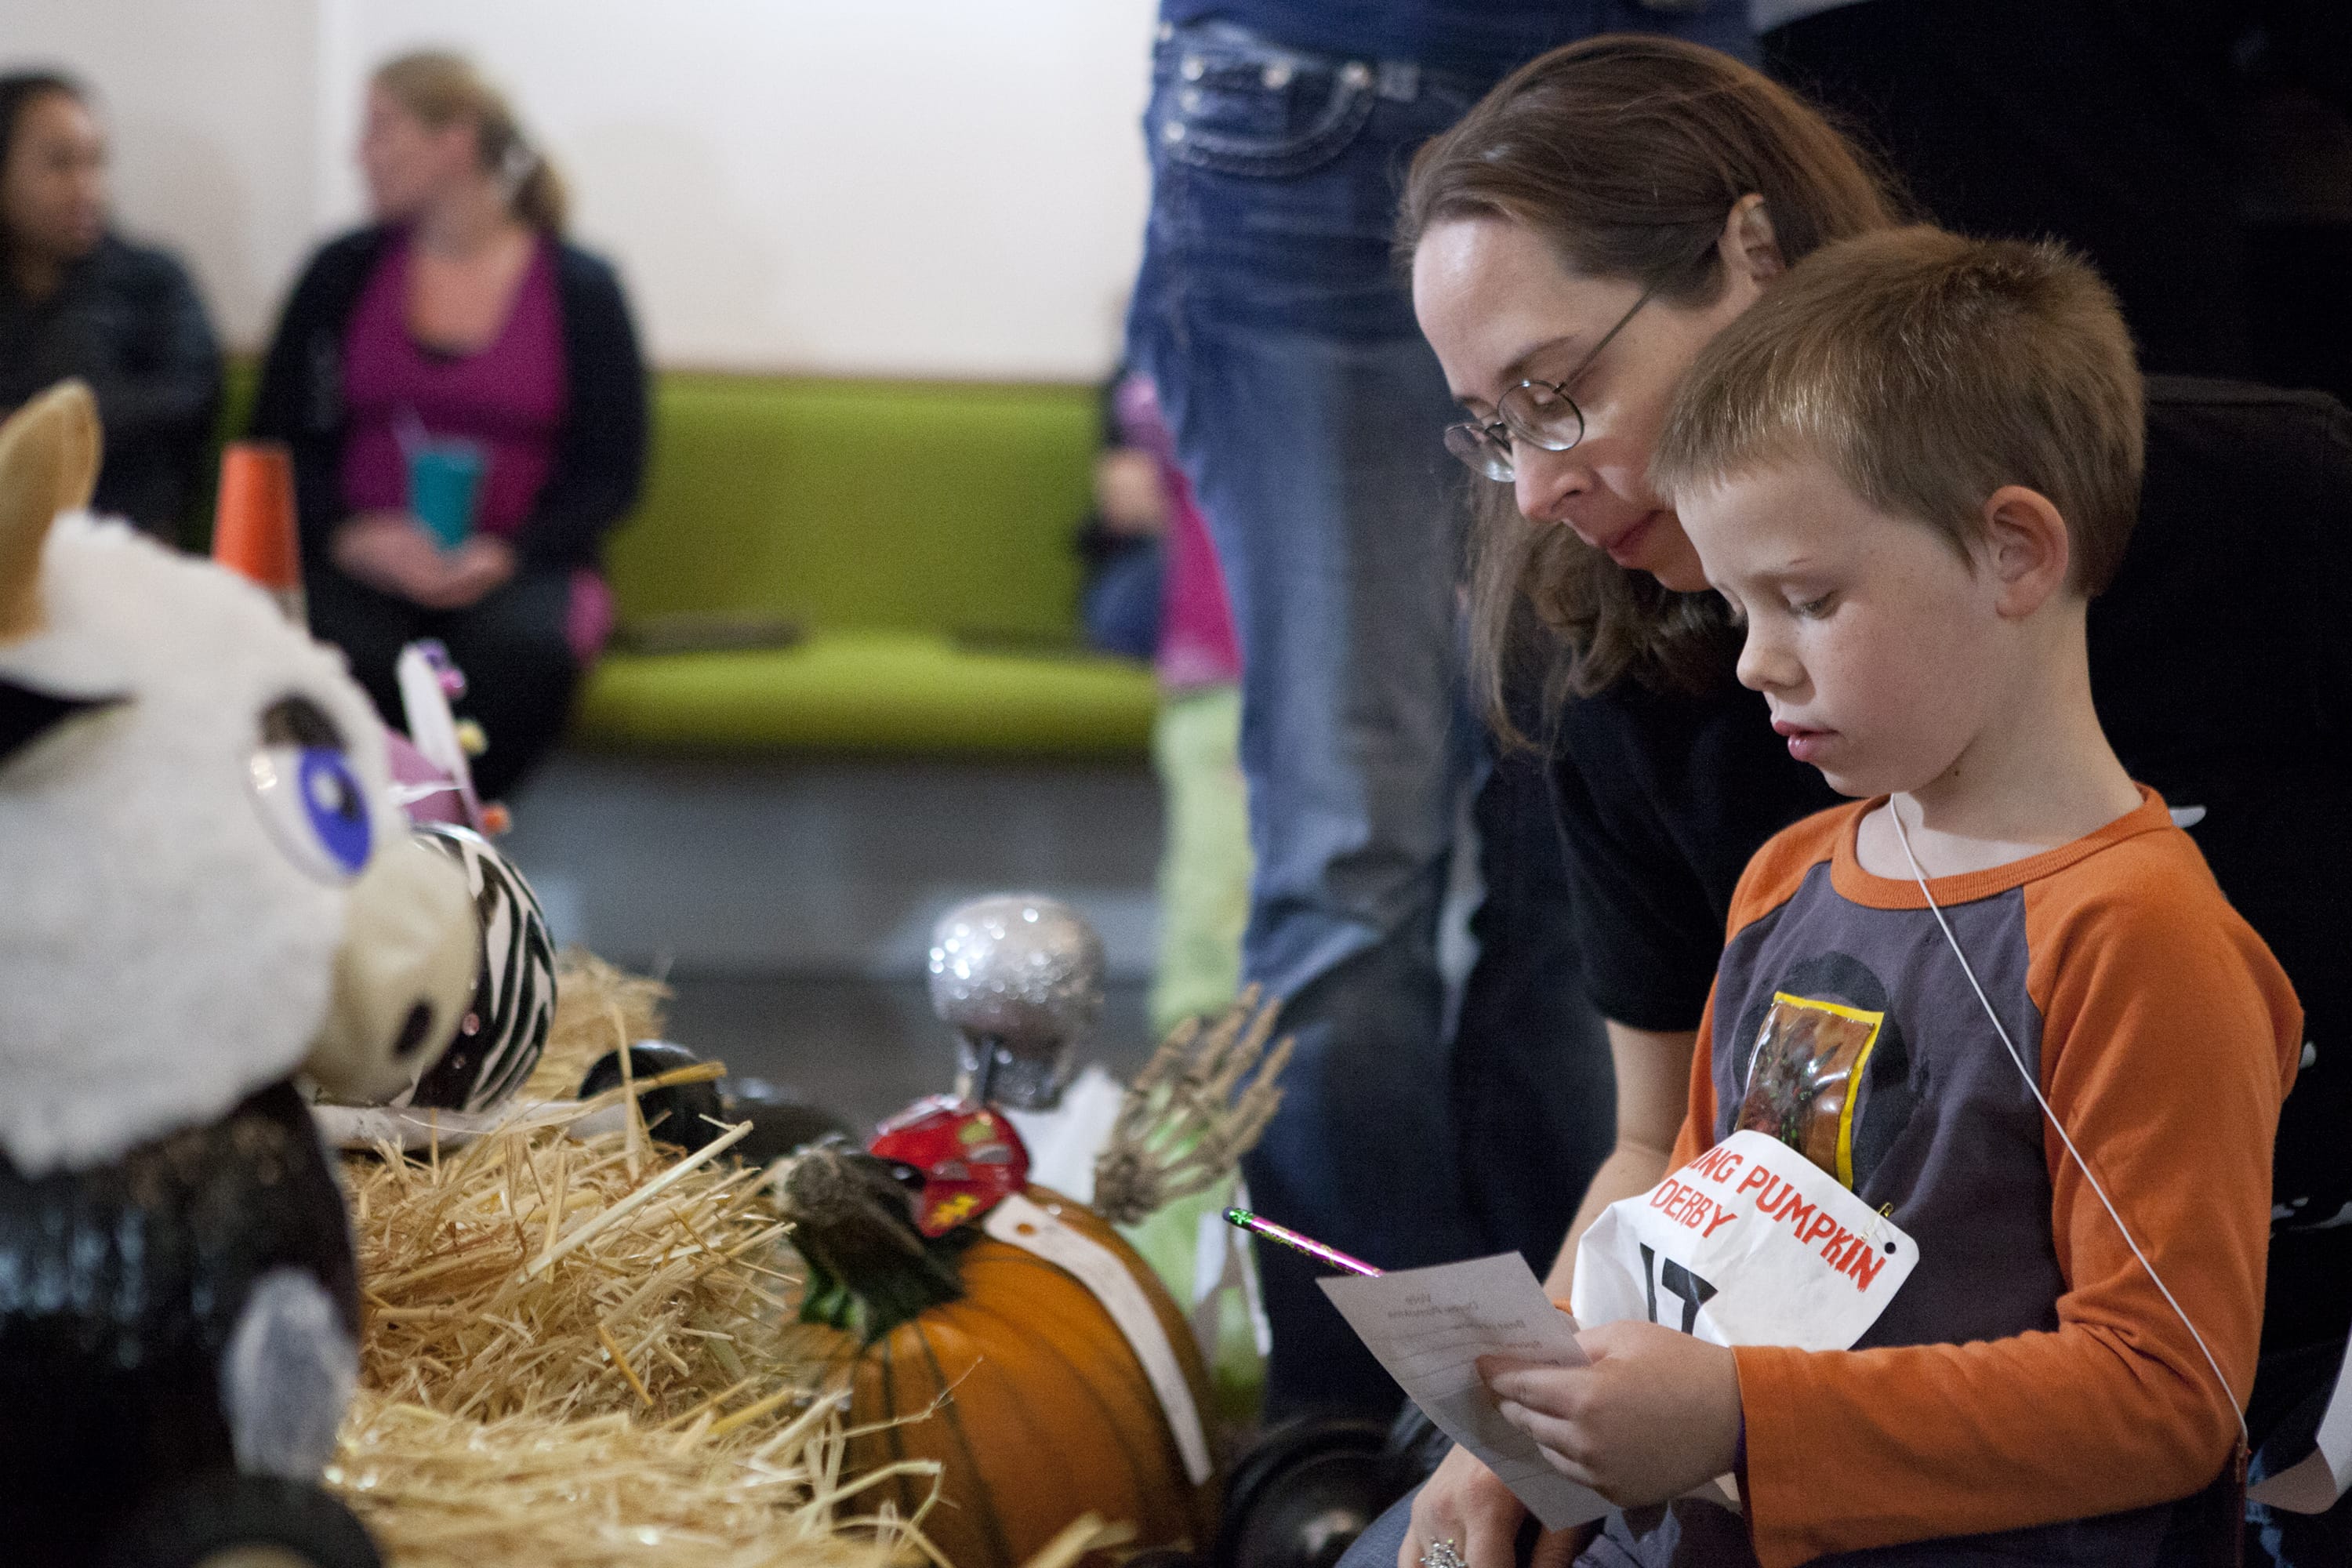 William Sturgil, 5, and his mother, Heather Sturgil, judge pumpkins at the third annual Screaming Pumpkin Derby.